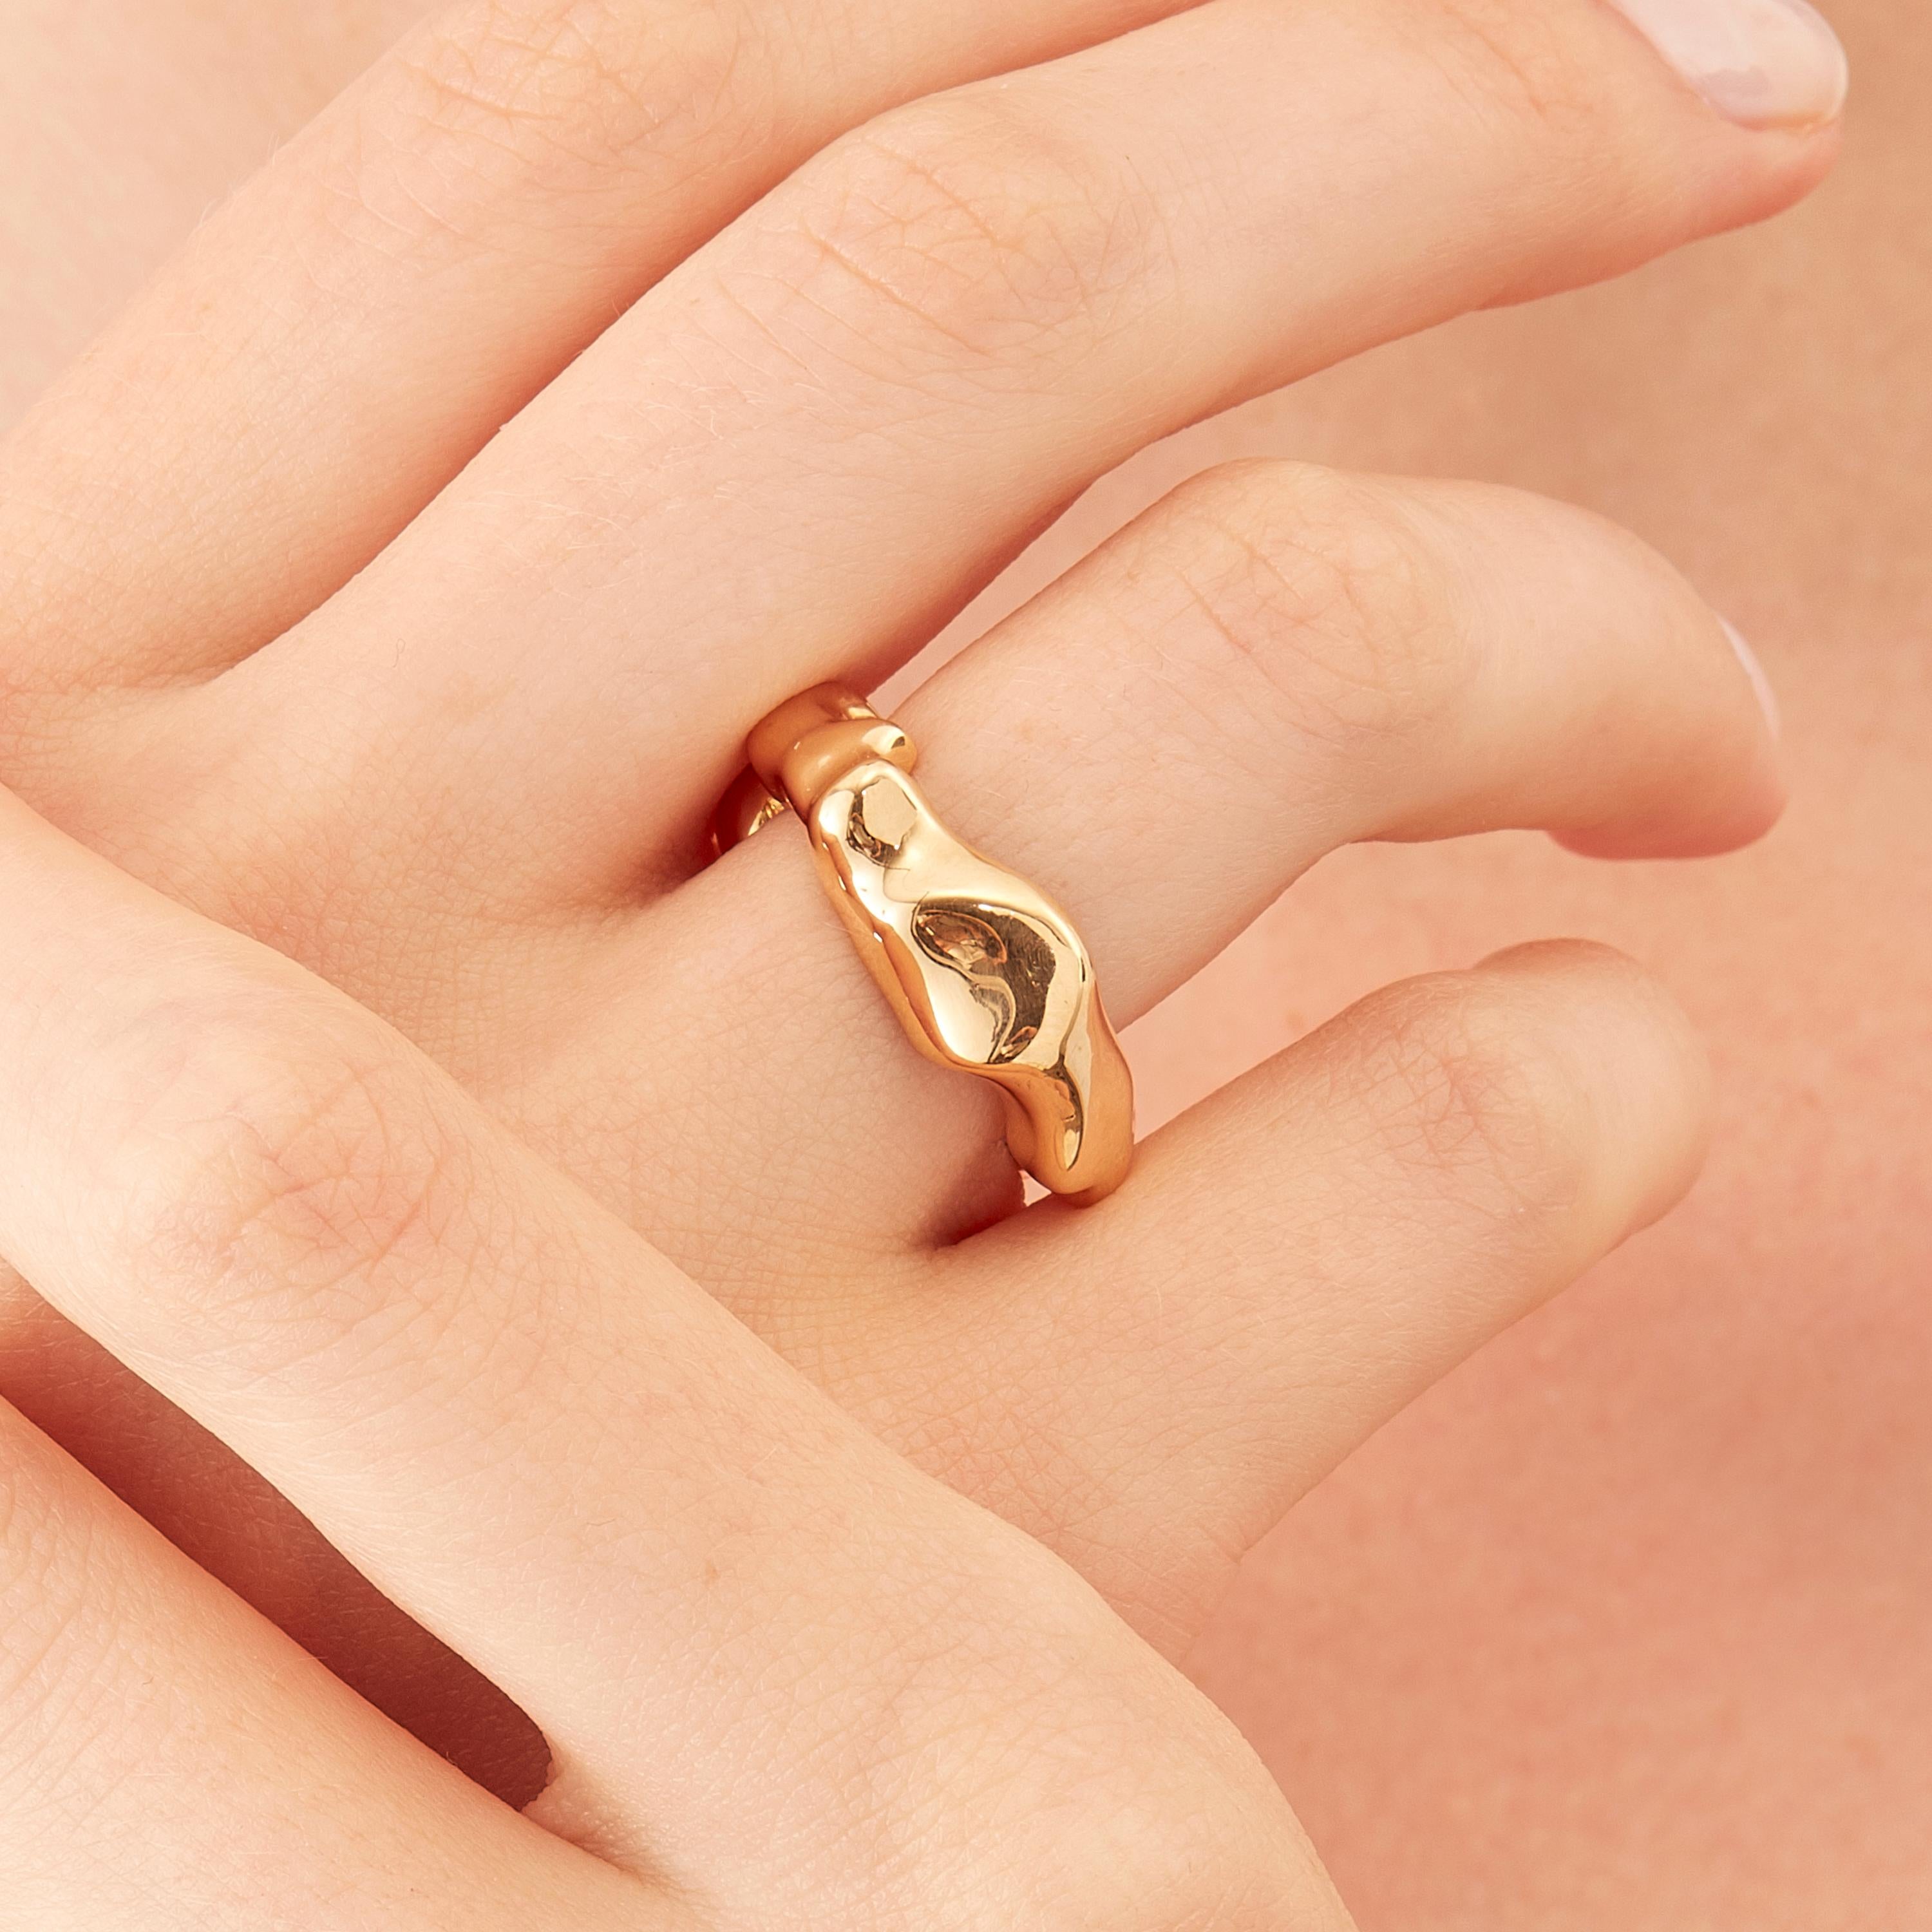 Made by hand in Nathalie Jean's Milan atelier in limited edition, Mercure Fashion Ring is in 18 karat rosé gold, a warm, sophisticated color close to yellow gold. Small, delicate, ebbing sculpture with seemingly random forms, these supple shapes are